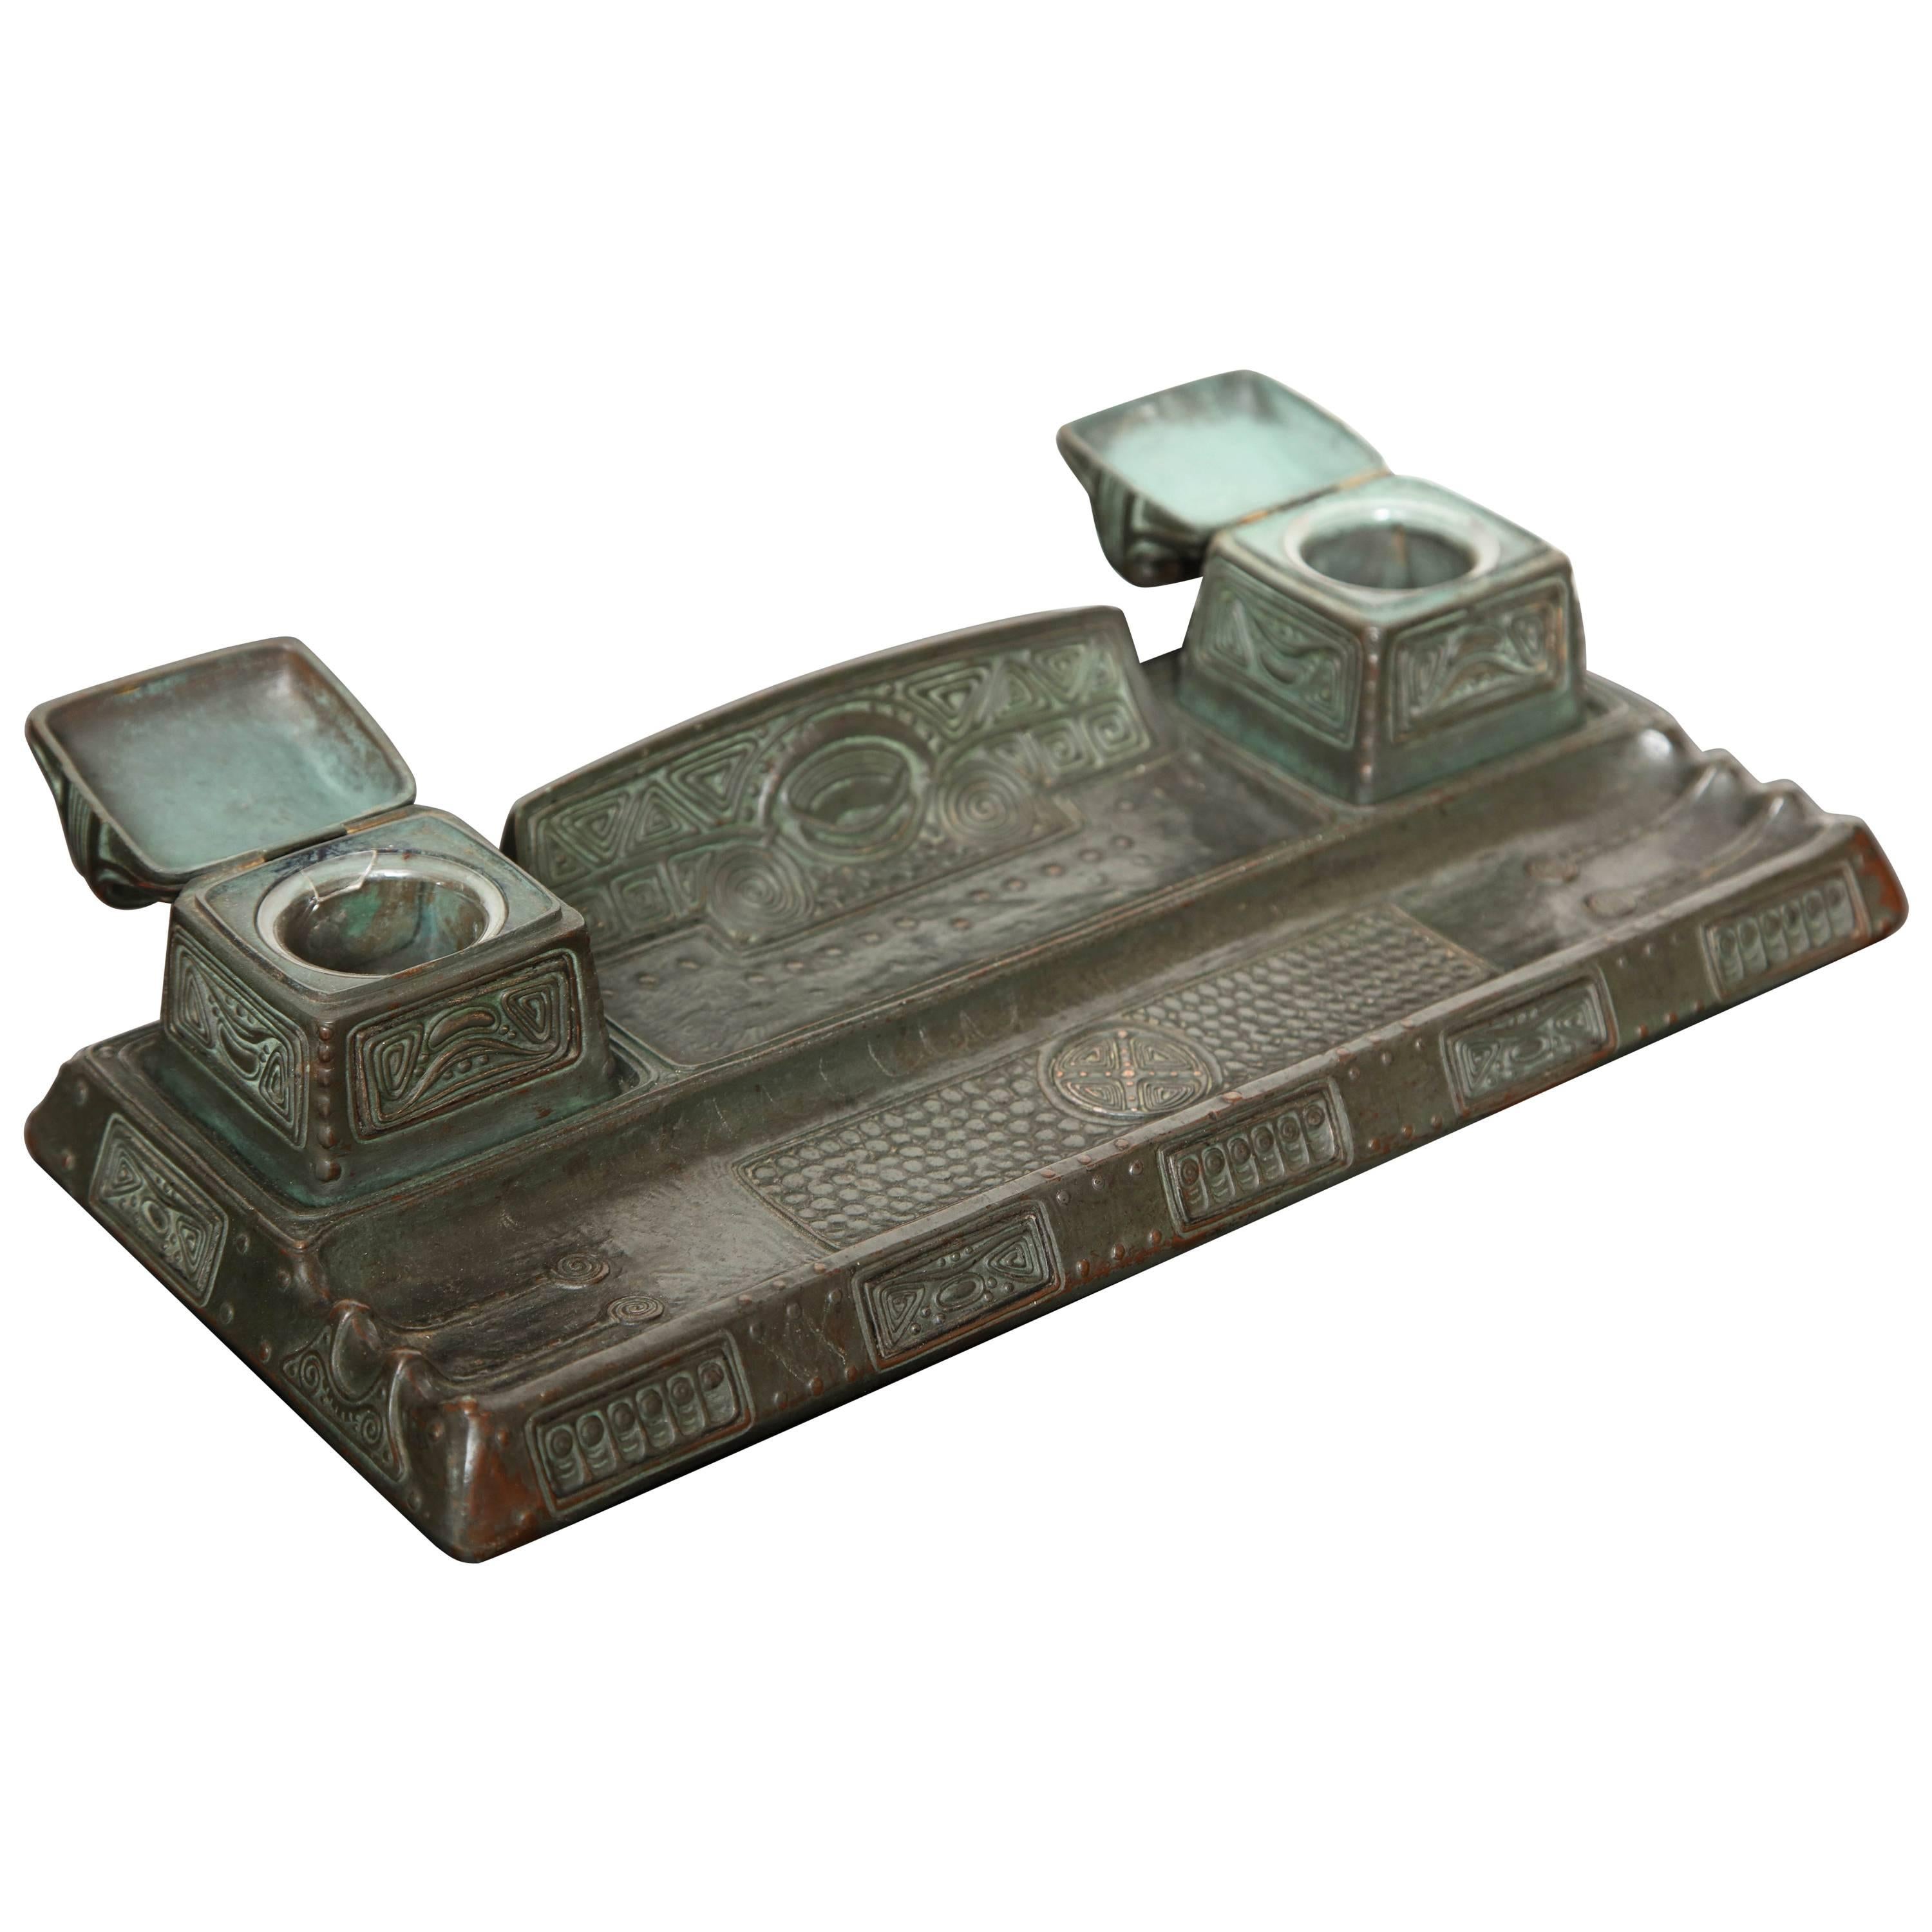 A Gustav Gurschner bronze inkwell/pentray. It was made in Austria during the early 20th century. The side of the inkwell/pentray is signed Gurschner.

Gustav Gurschner (1873–1970) was an Austrian sculptor active in the decorative arts.
He studied